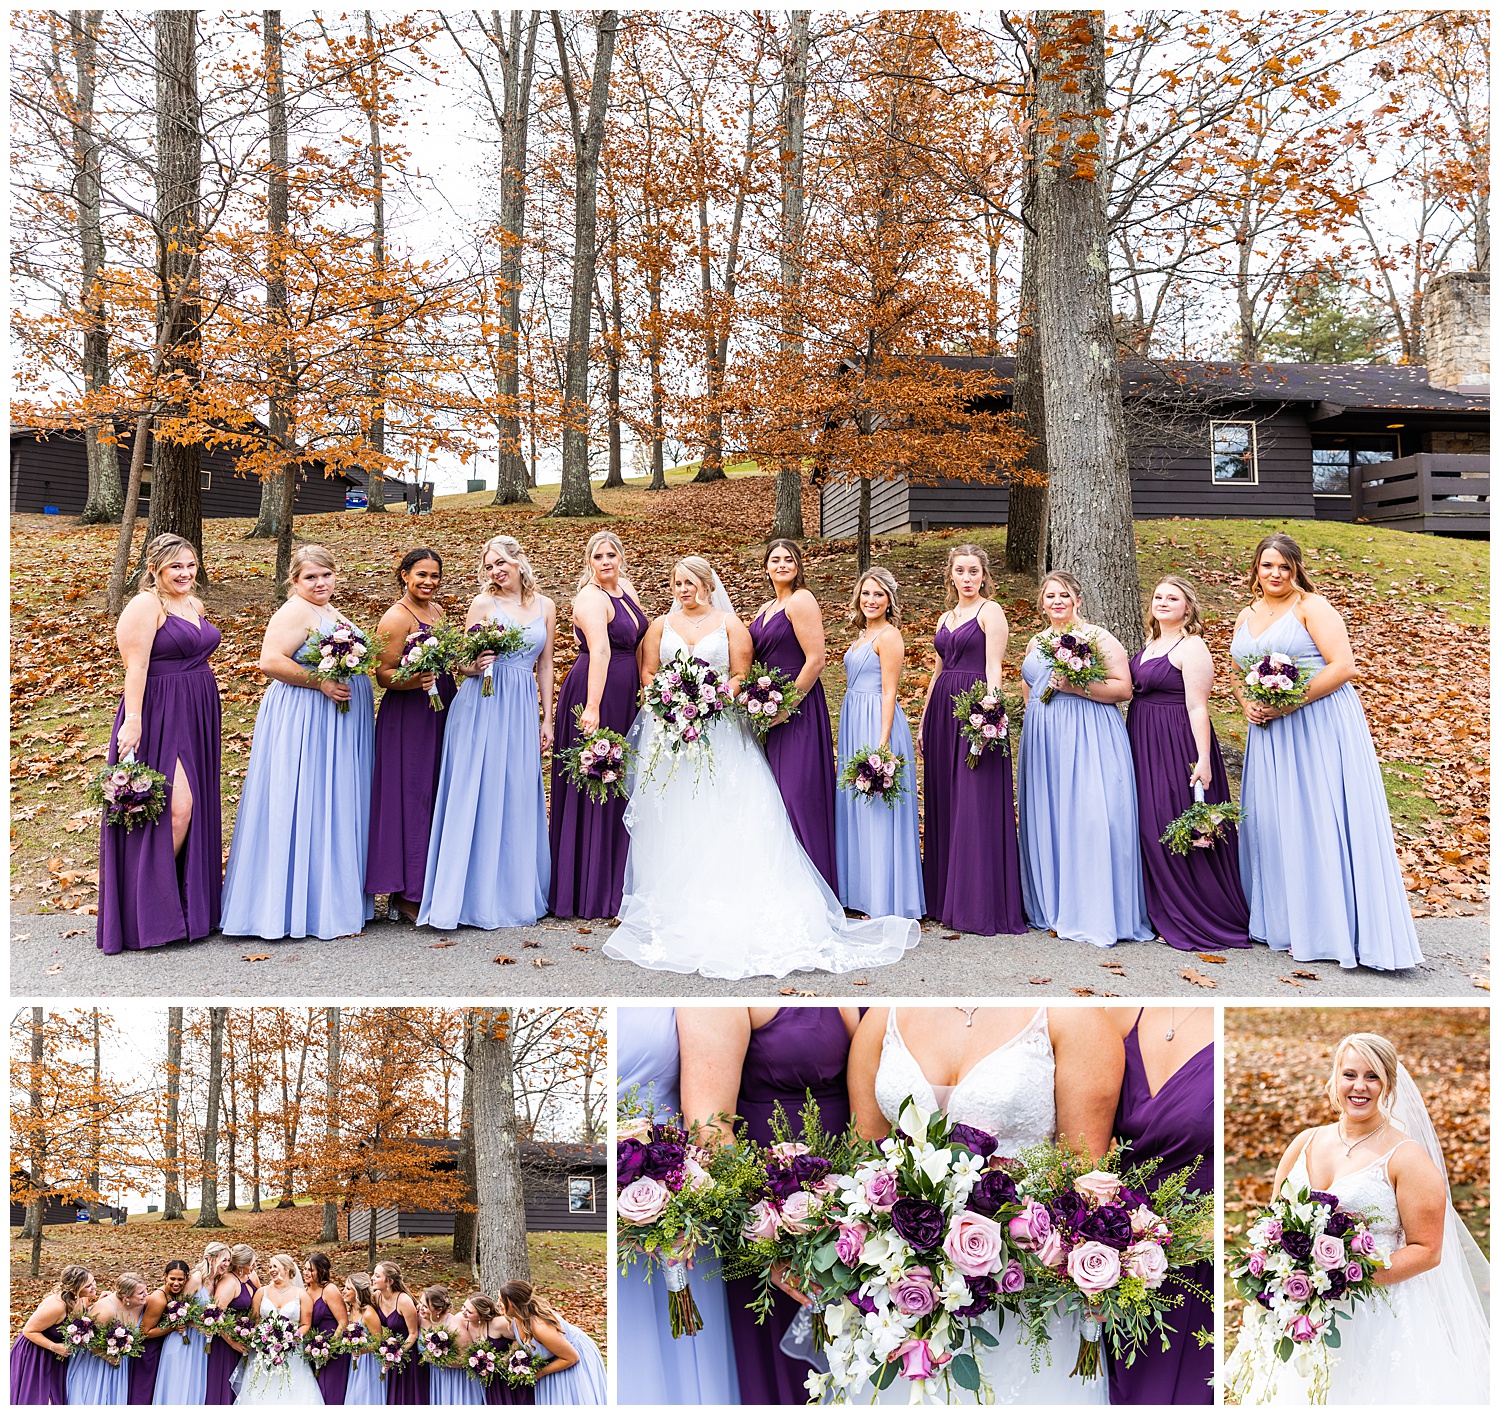 Bridesmaids in eggplant and periwinkle dresses posing with bride